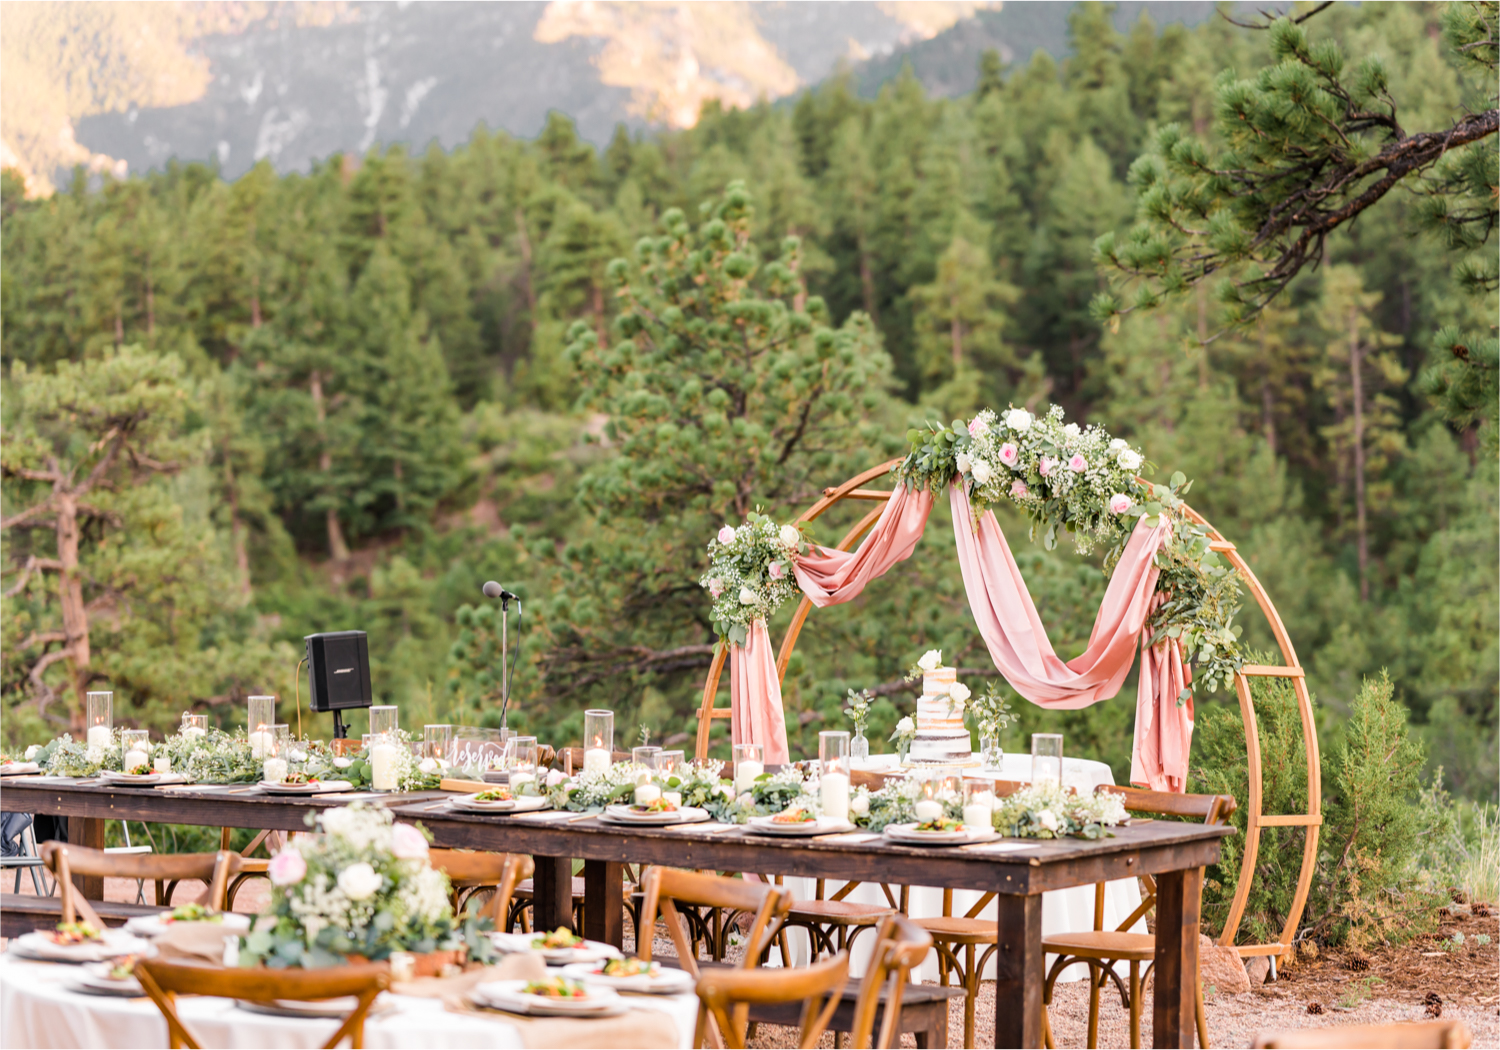 Autumn mountain wedding in Florence Colorado | Britni Girard Photography | Colorado Wedding Photo and Video Team | Mountainside Cabin for intimate wedding with rustic farm-tables and romantic details | Wedding Colors White, Dusty Rose and Sage | Catering by The Picnic Basket | Florals by Skyway Creations